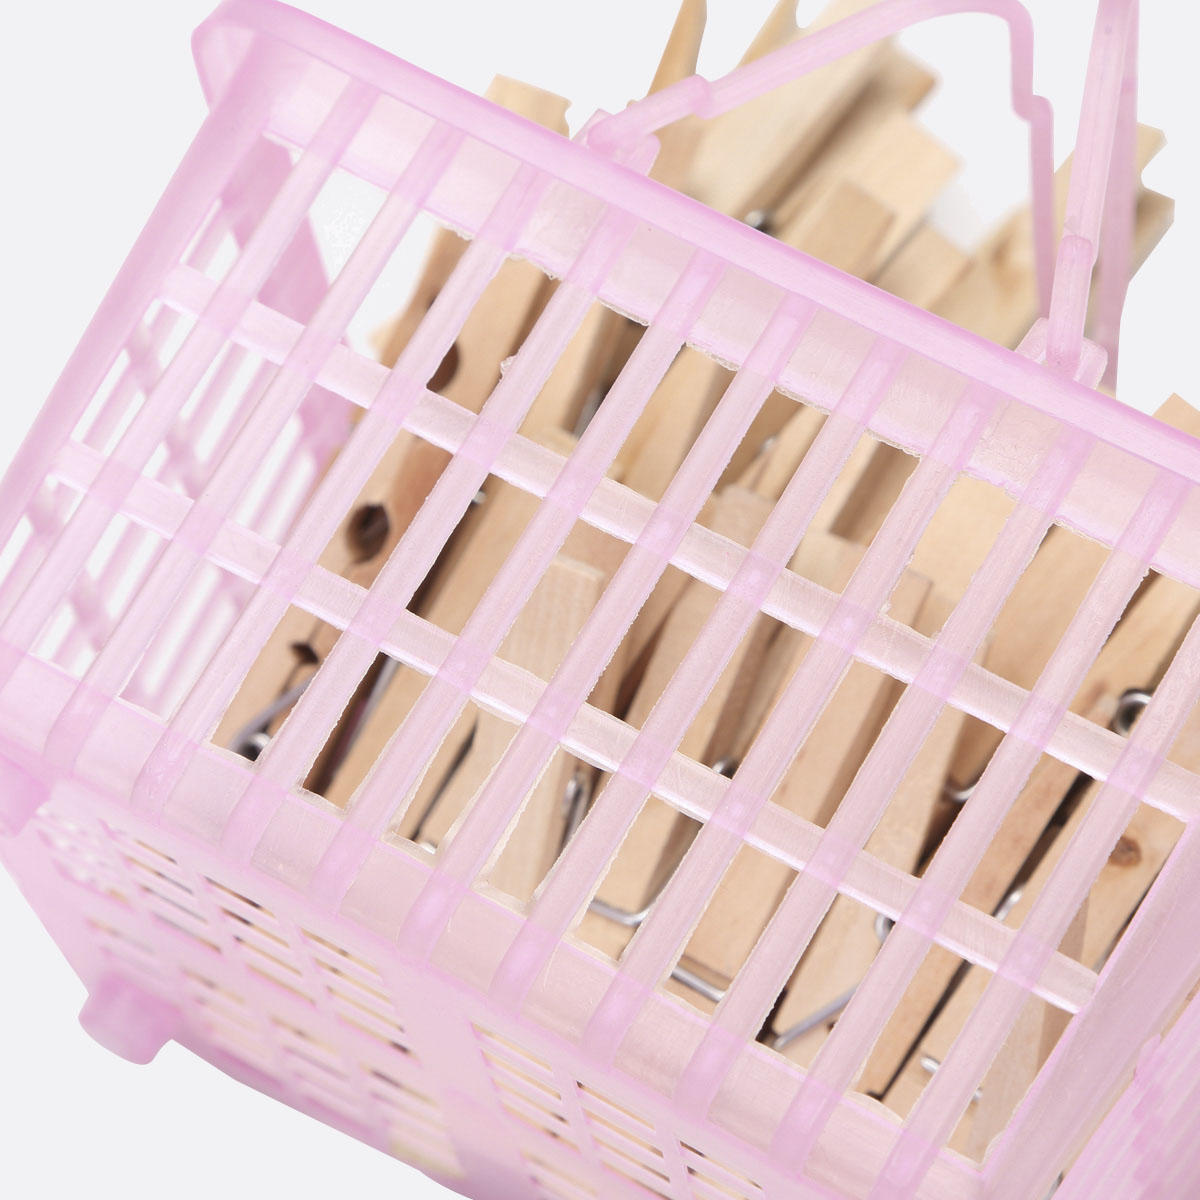 Plastic Baskets With Pegs-JX1202+JX1037